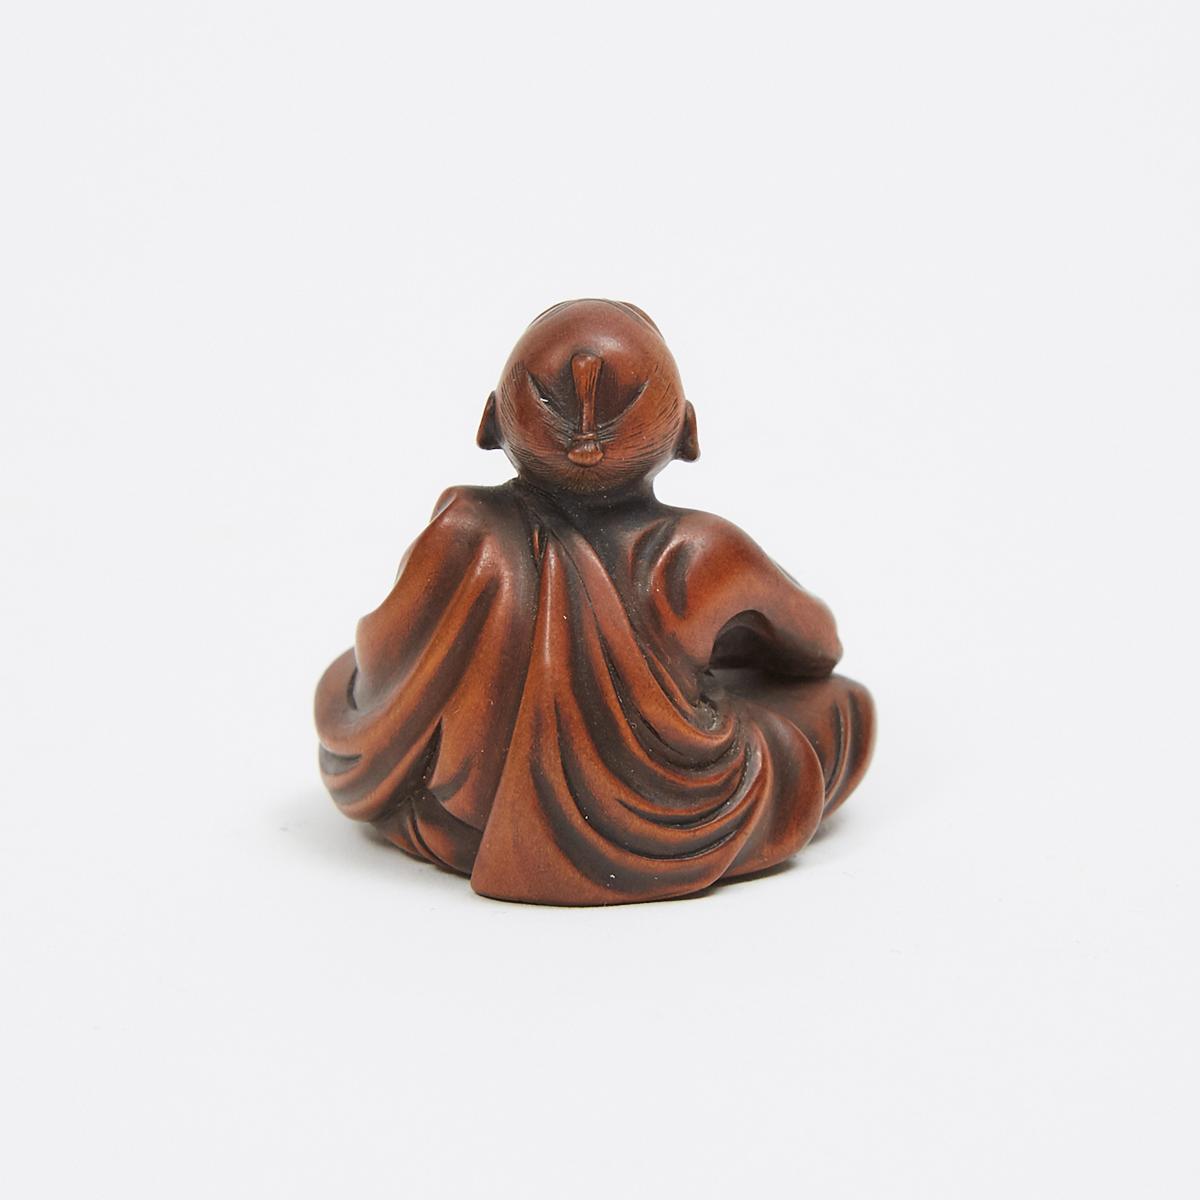 A Boxwood Netsuke of a Professional Sneezer, Signed Gyokkei, Mid-19th Century, 1.5 x 1.5 in — 3.8 x - Image 3 of 4